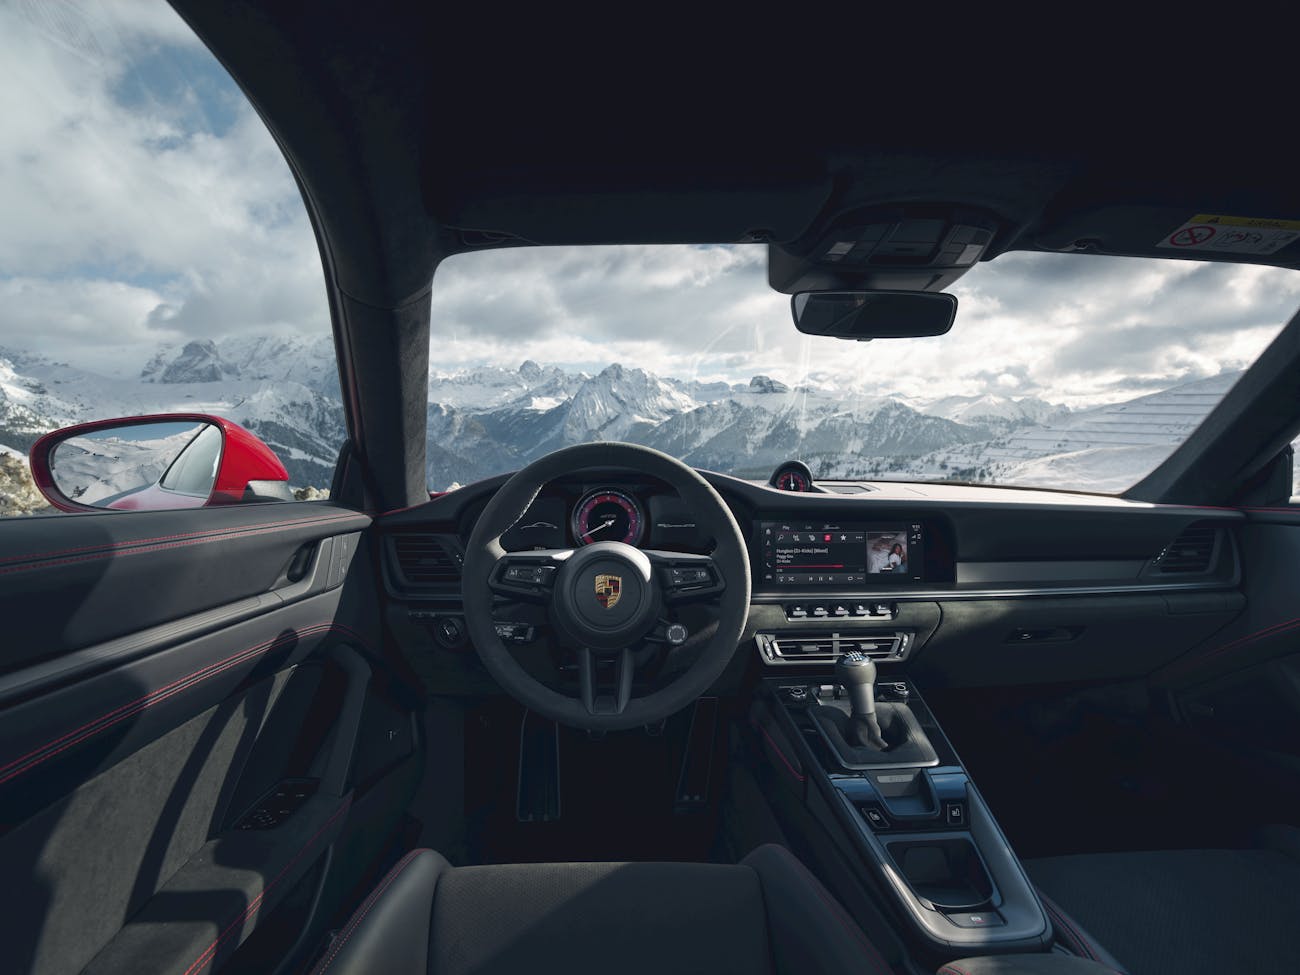 View from driver seat of Porsche 911 GTS out onto mountains